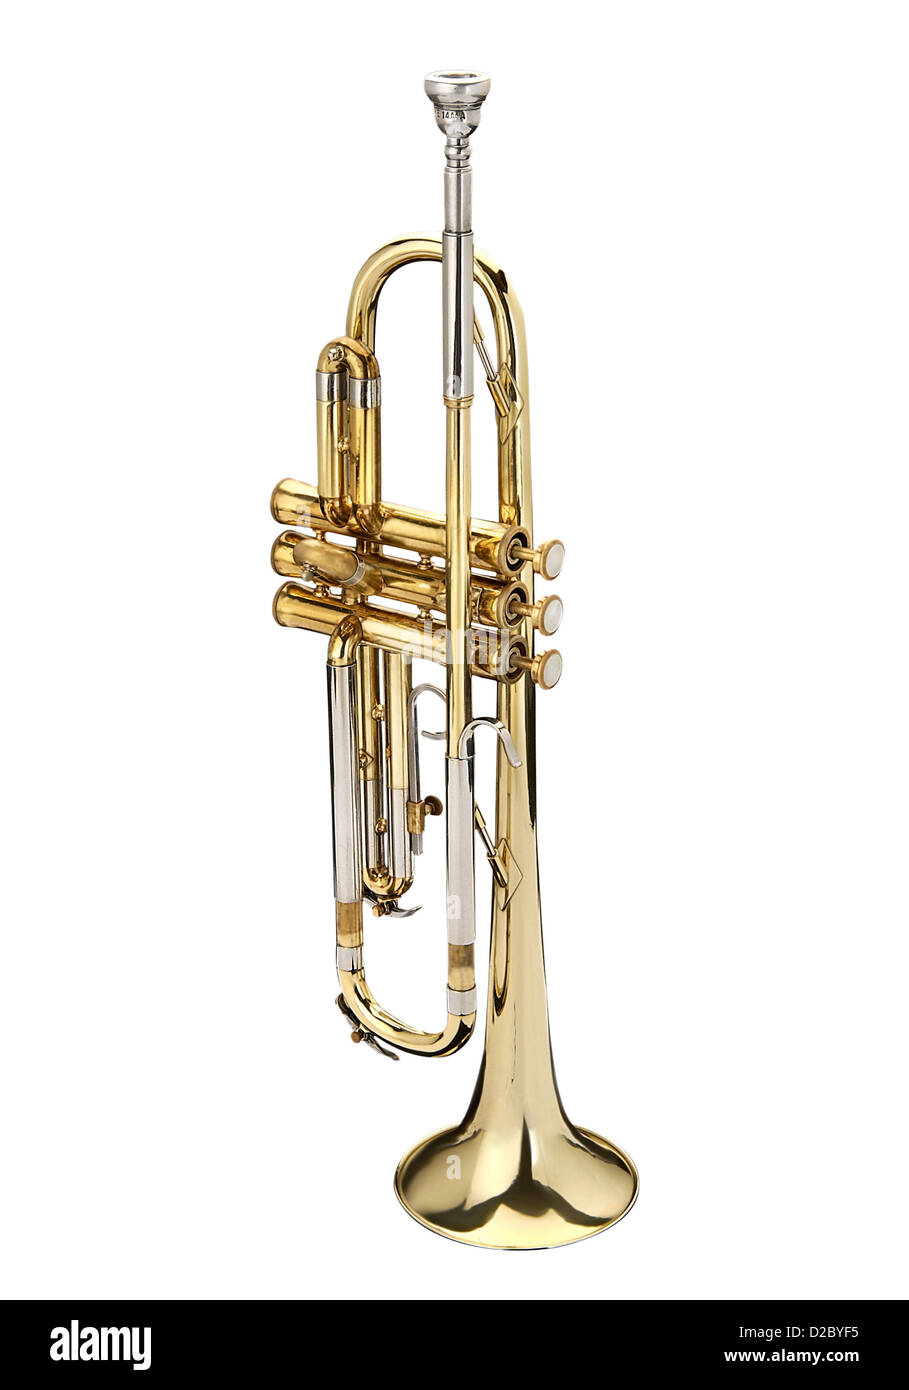 Trumpet, wind instrument. On a white background. Stock Photo